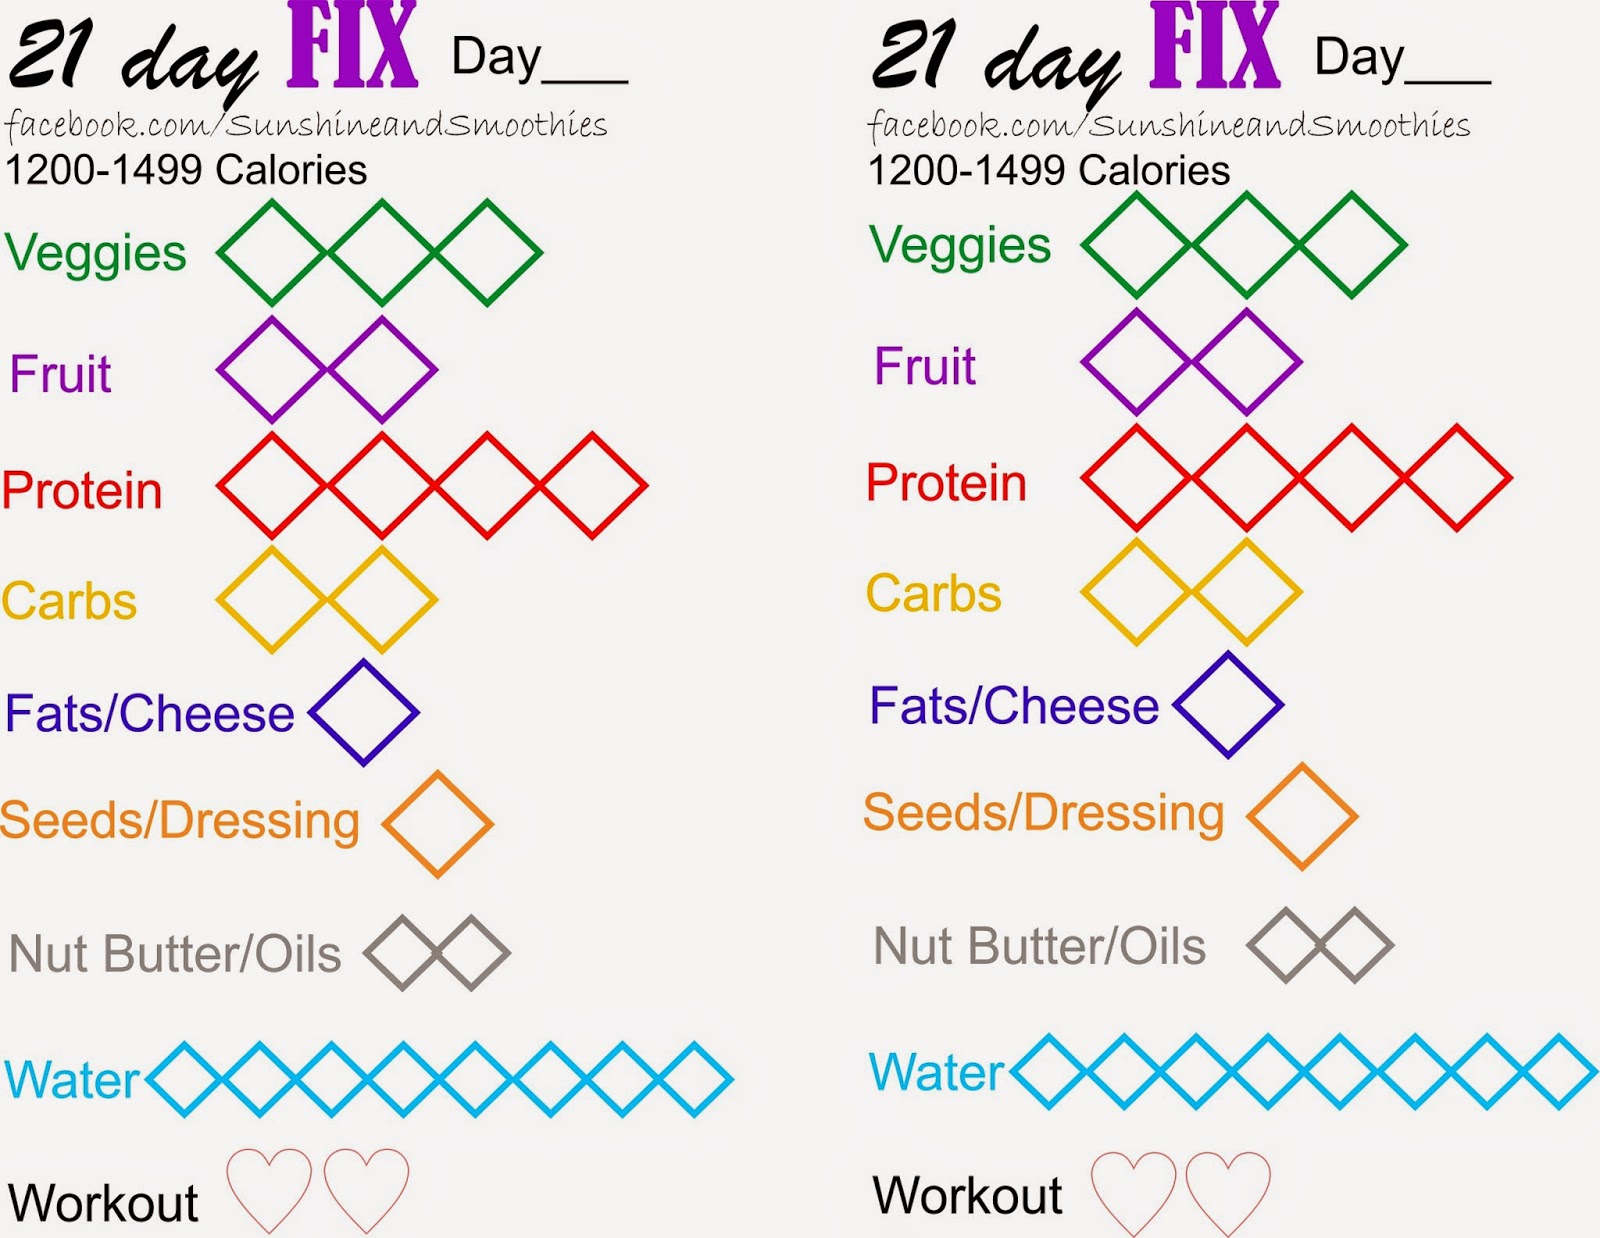 sunshine-and-smoothies-fitness-21-day-fix-tally-sheets-all-calorie-ranges